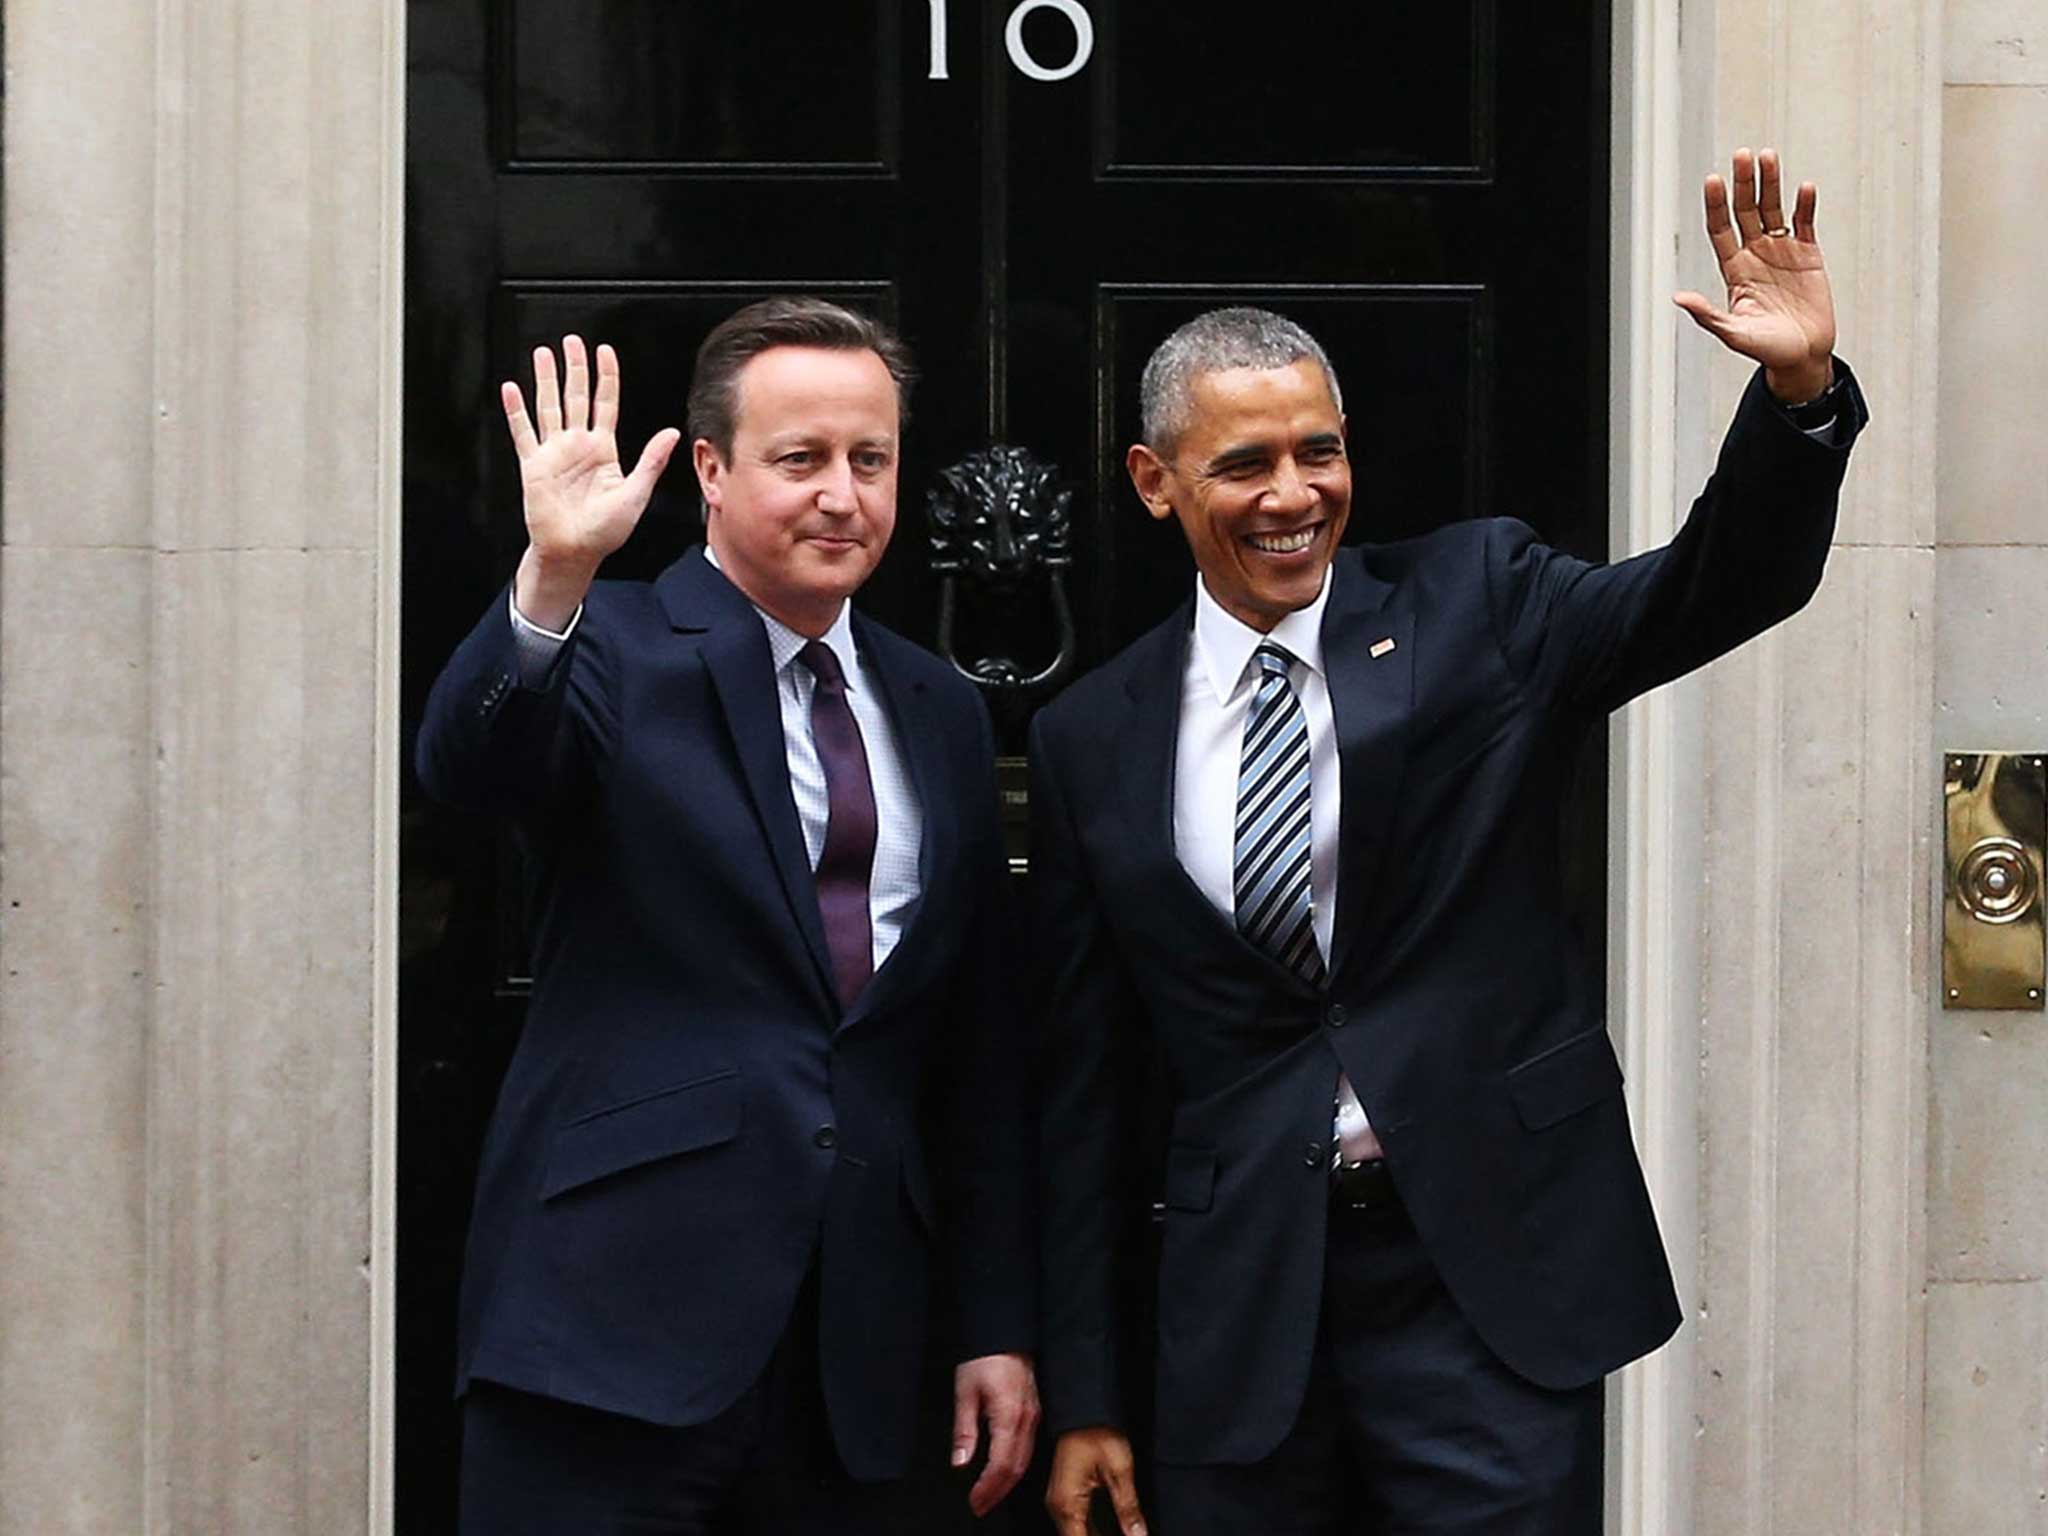 President Barack Obama arrives at Downing Street to meet with British Prime Minister David Cameron